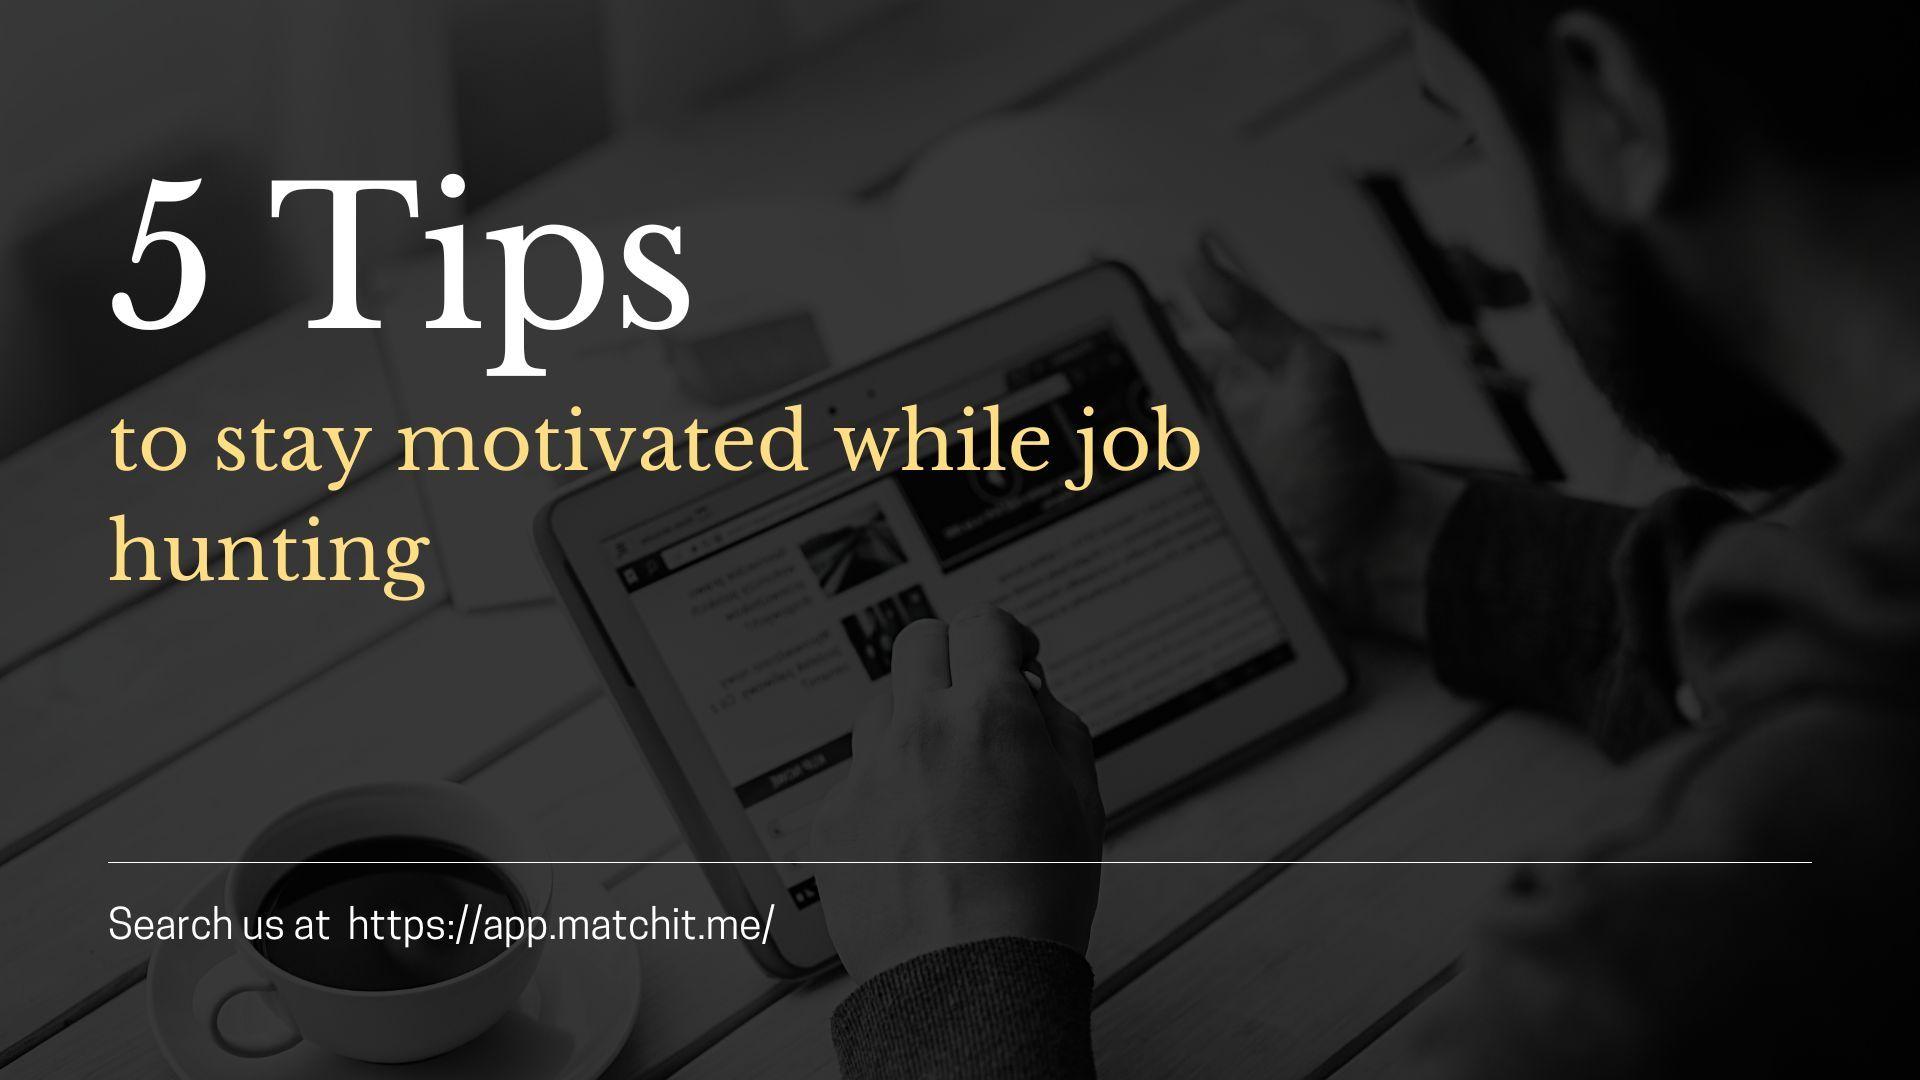 How to stay motivated while looking for a job?